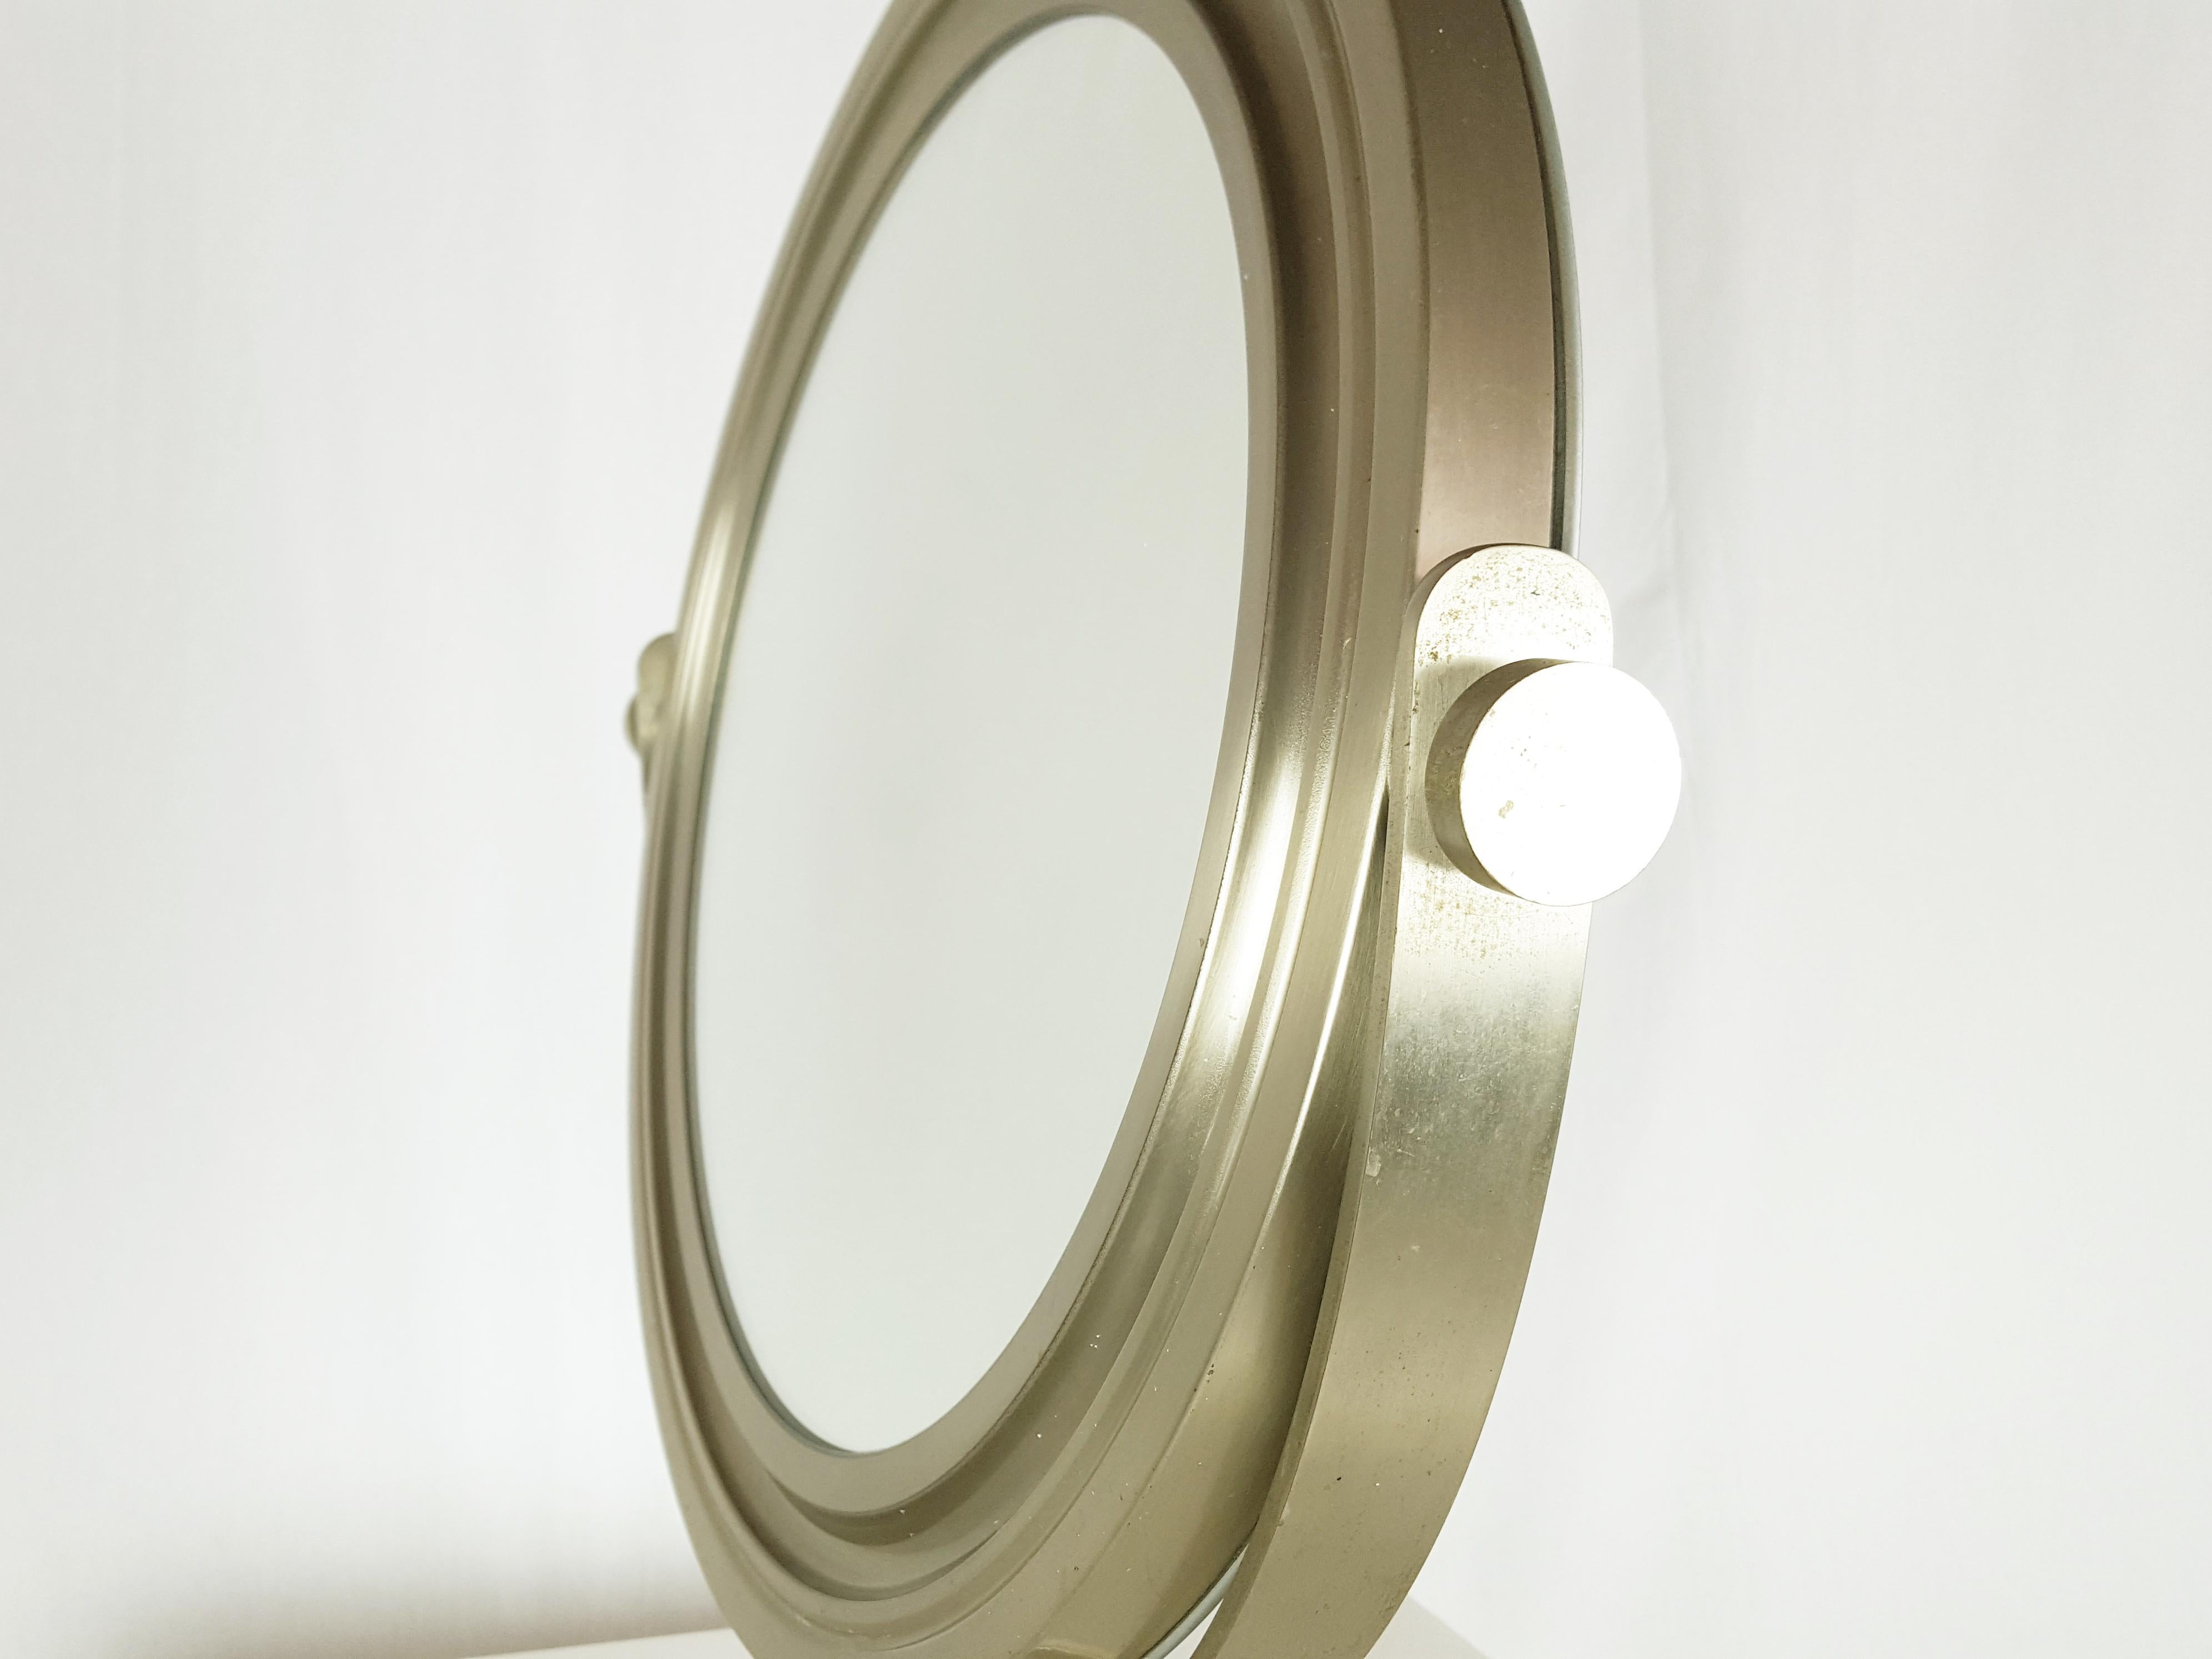 Nickel Plated Metal & Mirrored Glass 1960s Table Mirror in the Style of S. Mazza For Sale 2